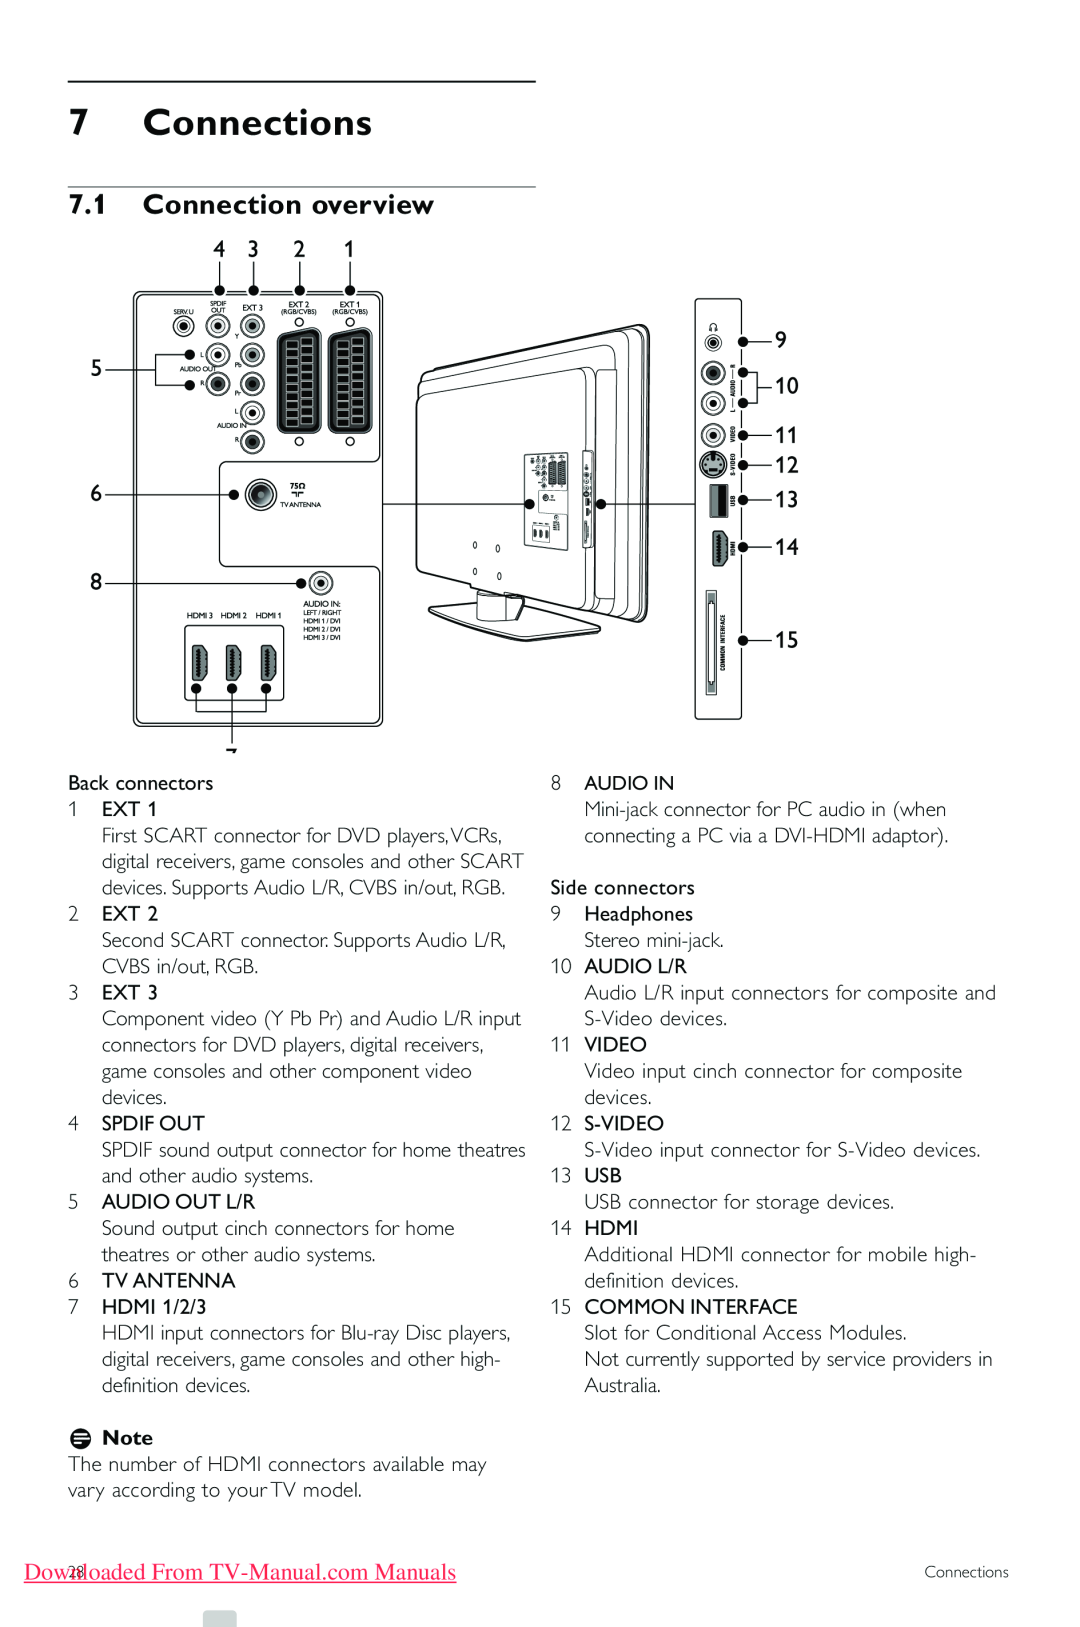 Philips 43PFL5603, 42PFL5403, 47PFL5603 Connections, 7.1Connection overview, Downloaded From TV-Manual.comManuals, rNote 